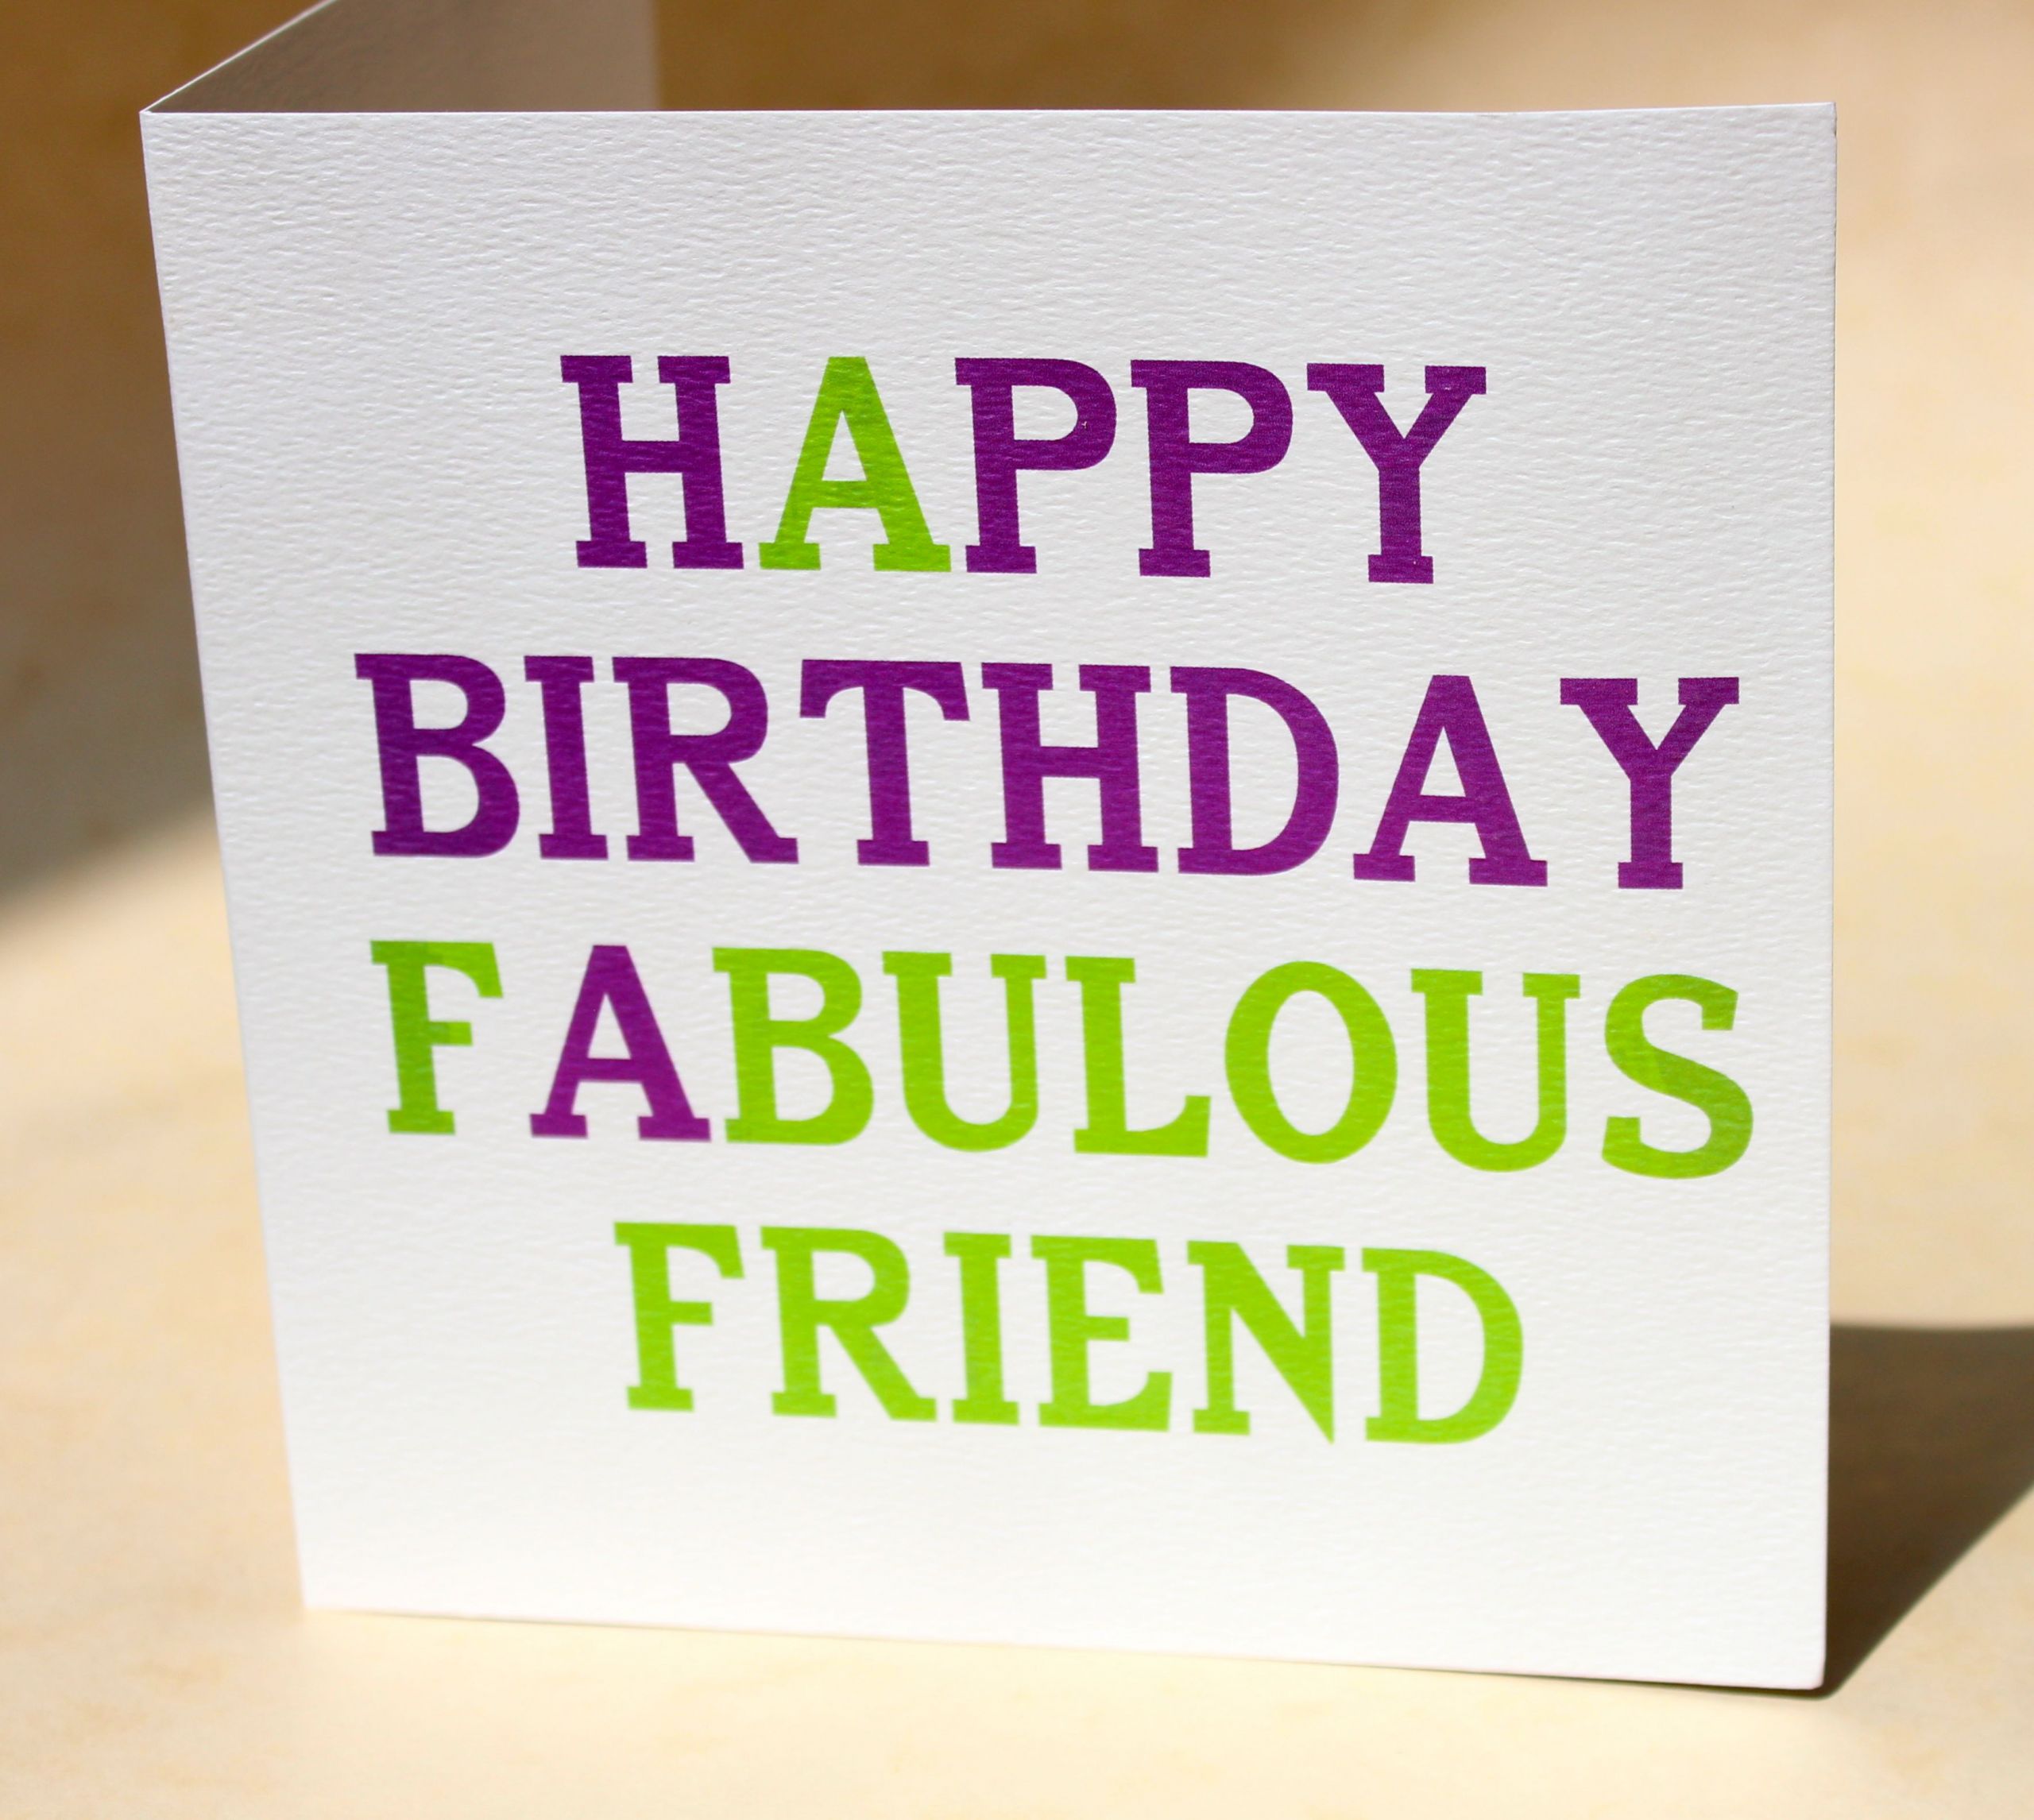 Friends Quotes For Birthday
 Happy birthday friends quotes pictures